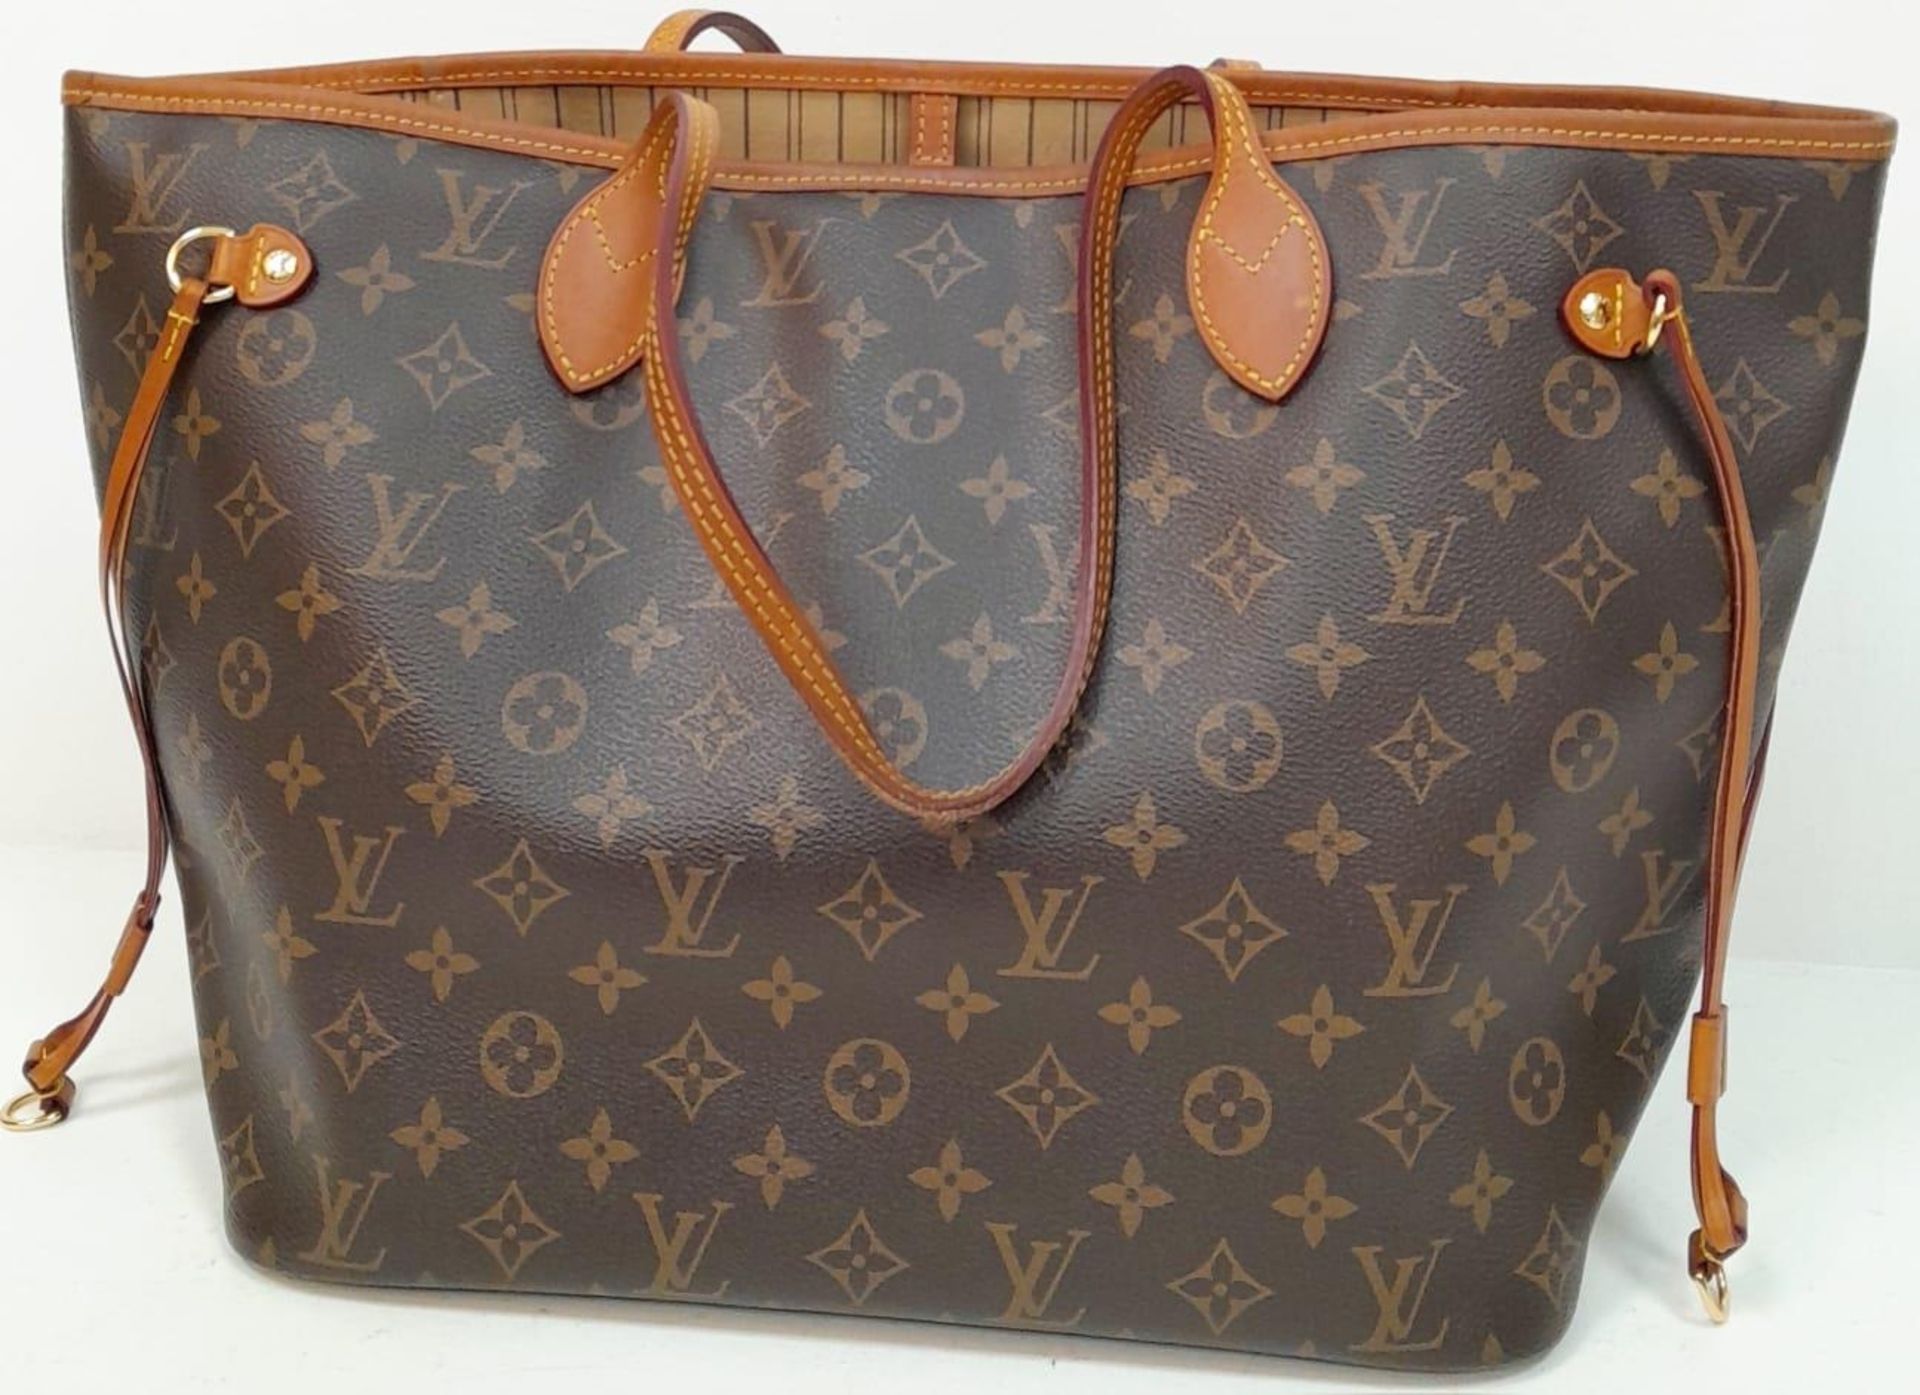 A Louis Vuitton Neverfull Tote Bag. LV monogram canvas exterior with cowhide handles and accents.